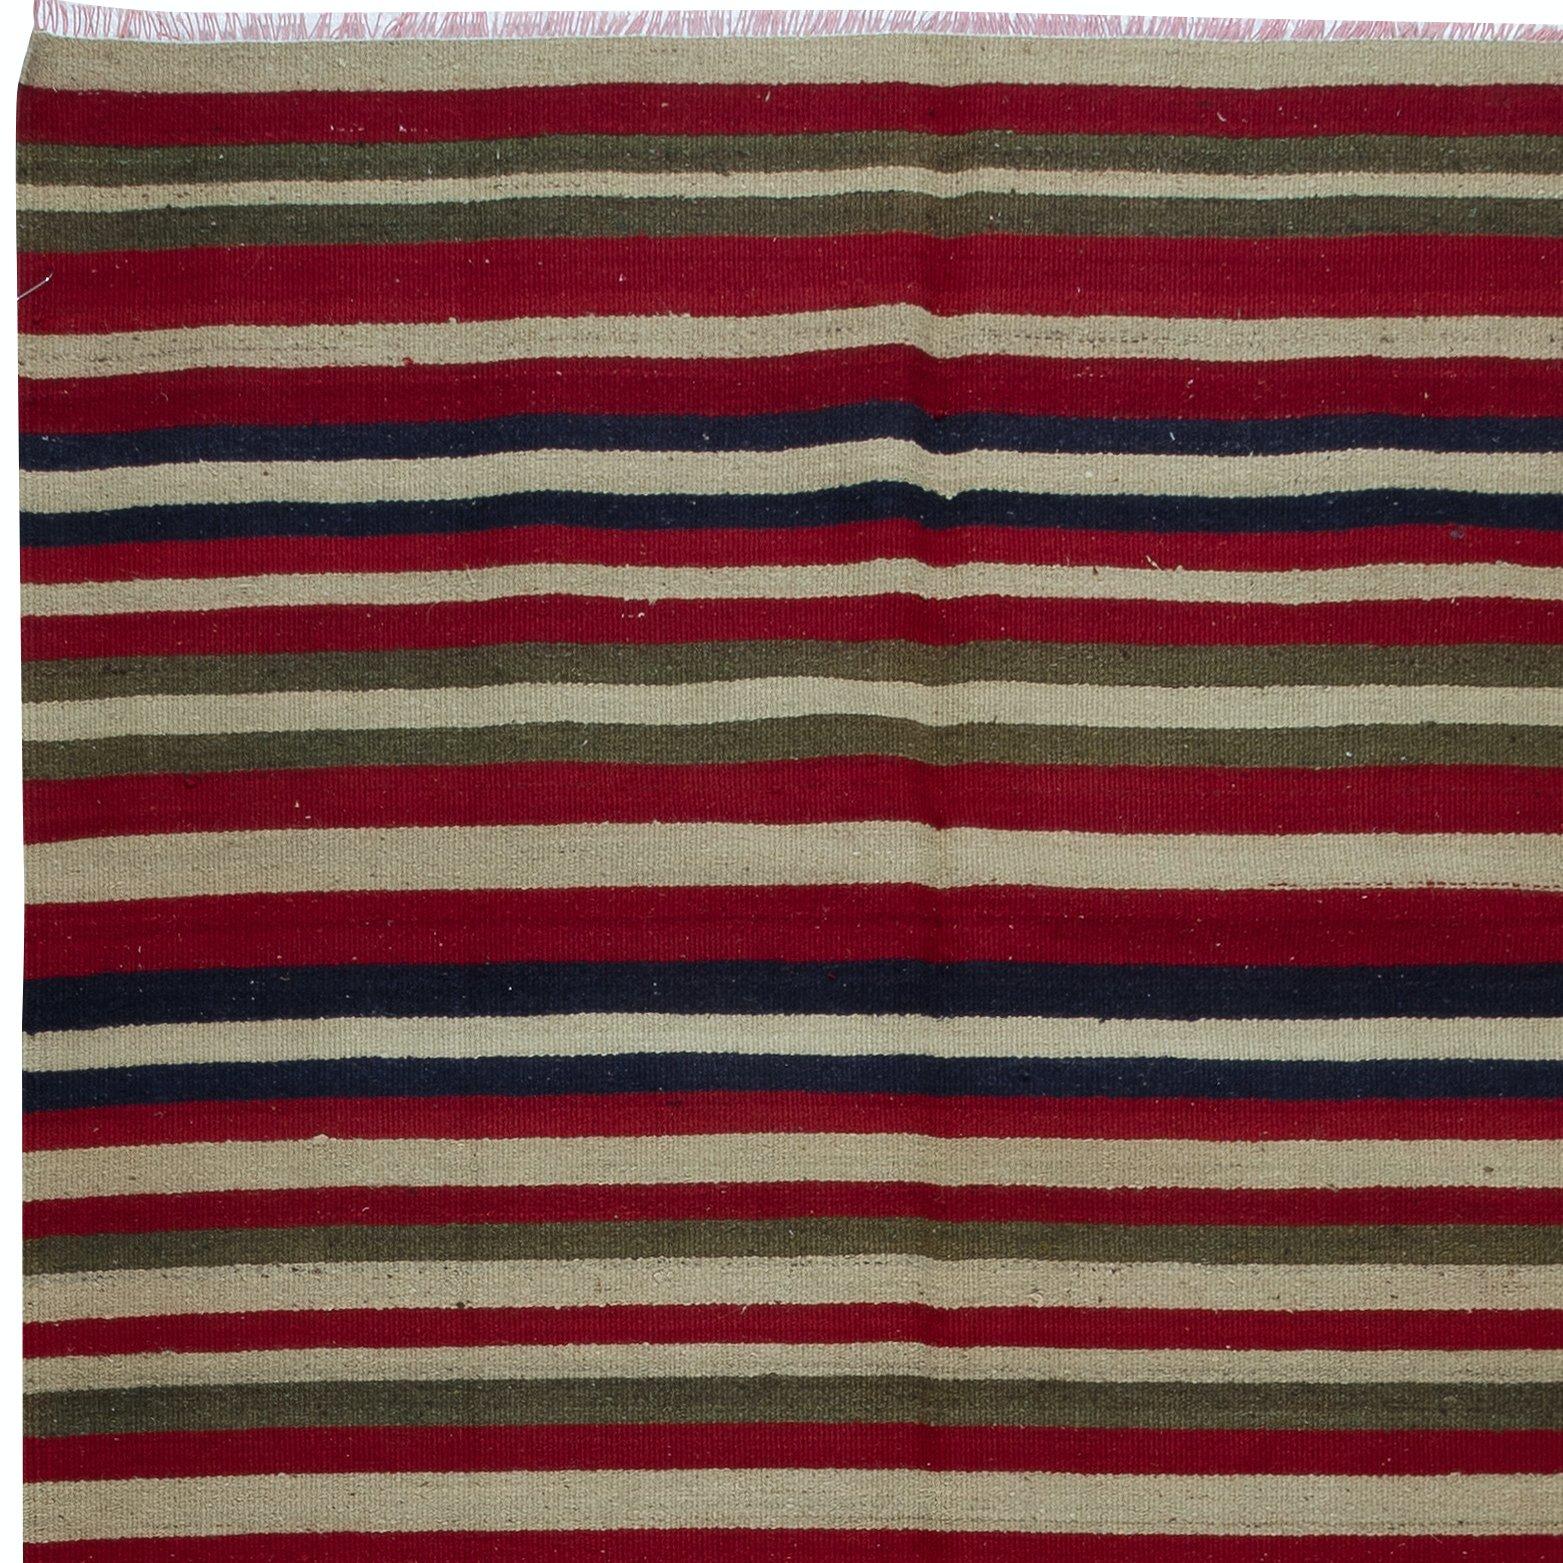 4.8x9.8 Ft Hand-Woven Vintage Turkish Kilim Rug with Colorful Stripes, 100% Wool In Good Condition For Sale In Philadelphia, PA